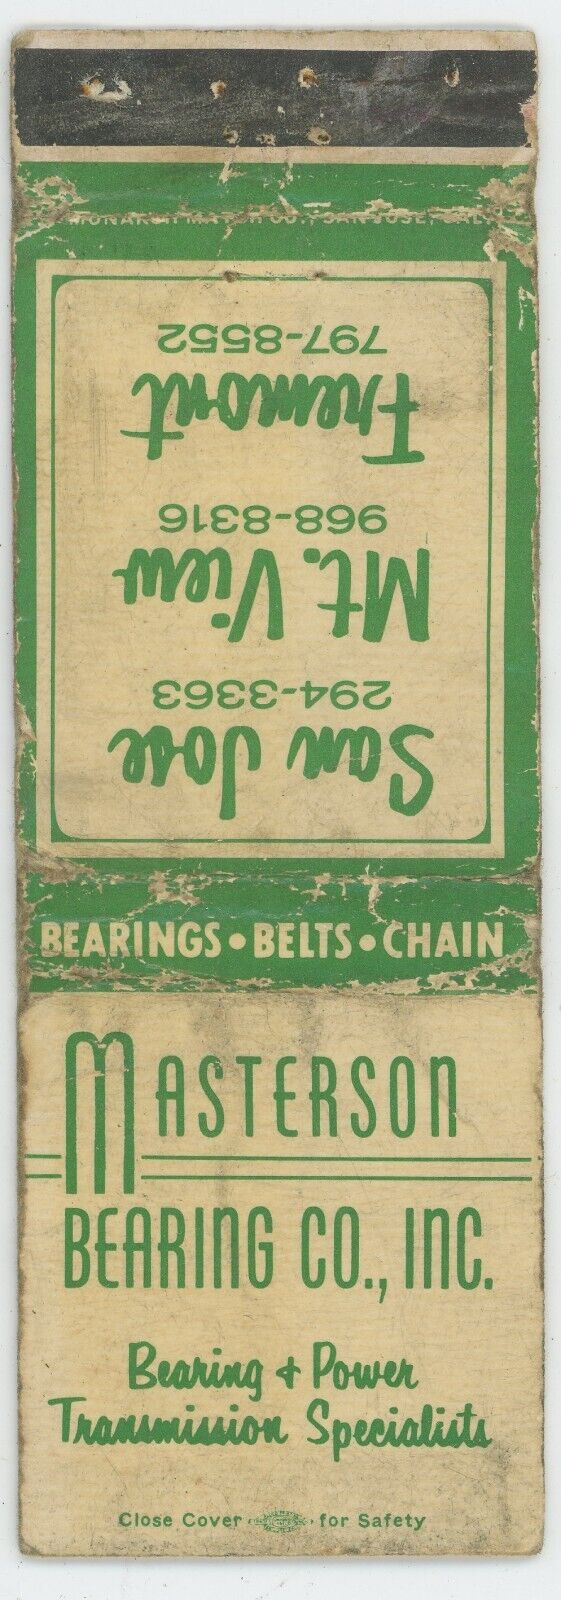 Masterson Bearing Co. San Jose, CA Mt.View Fremont Antq Matchbook Cover D-6